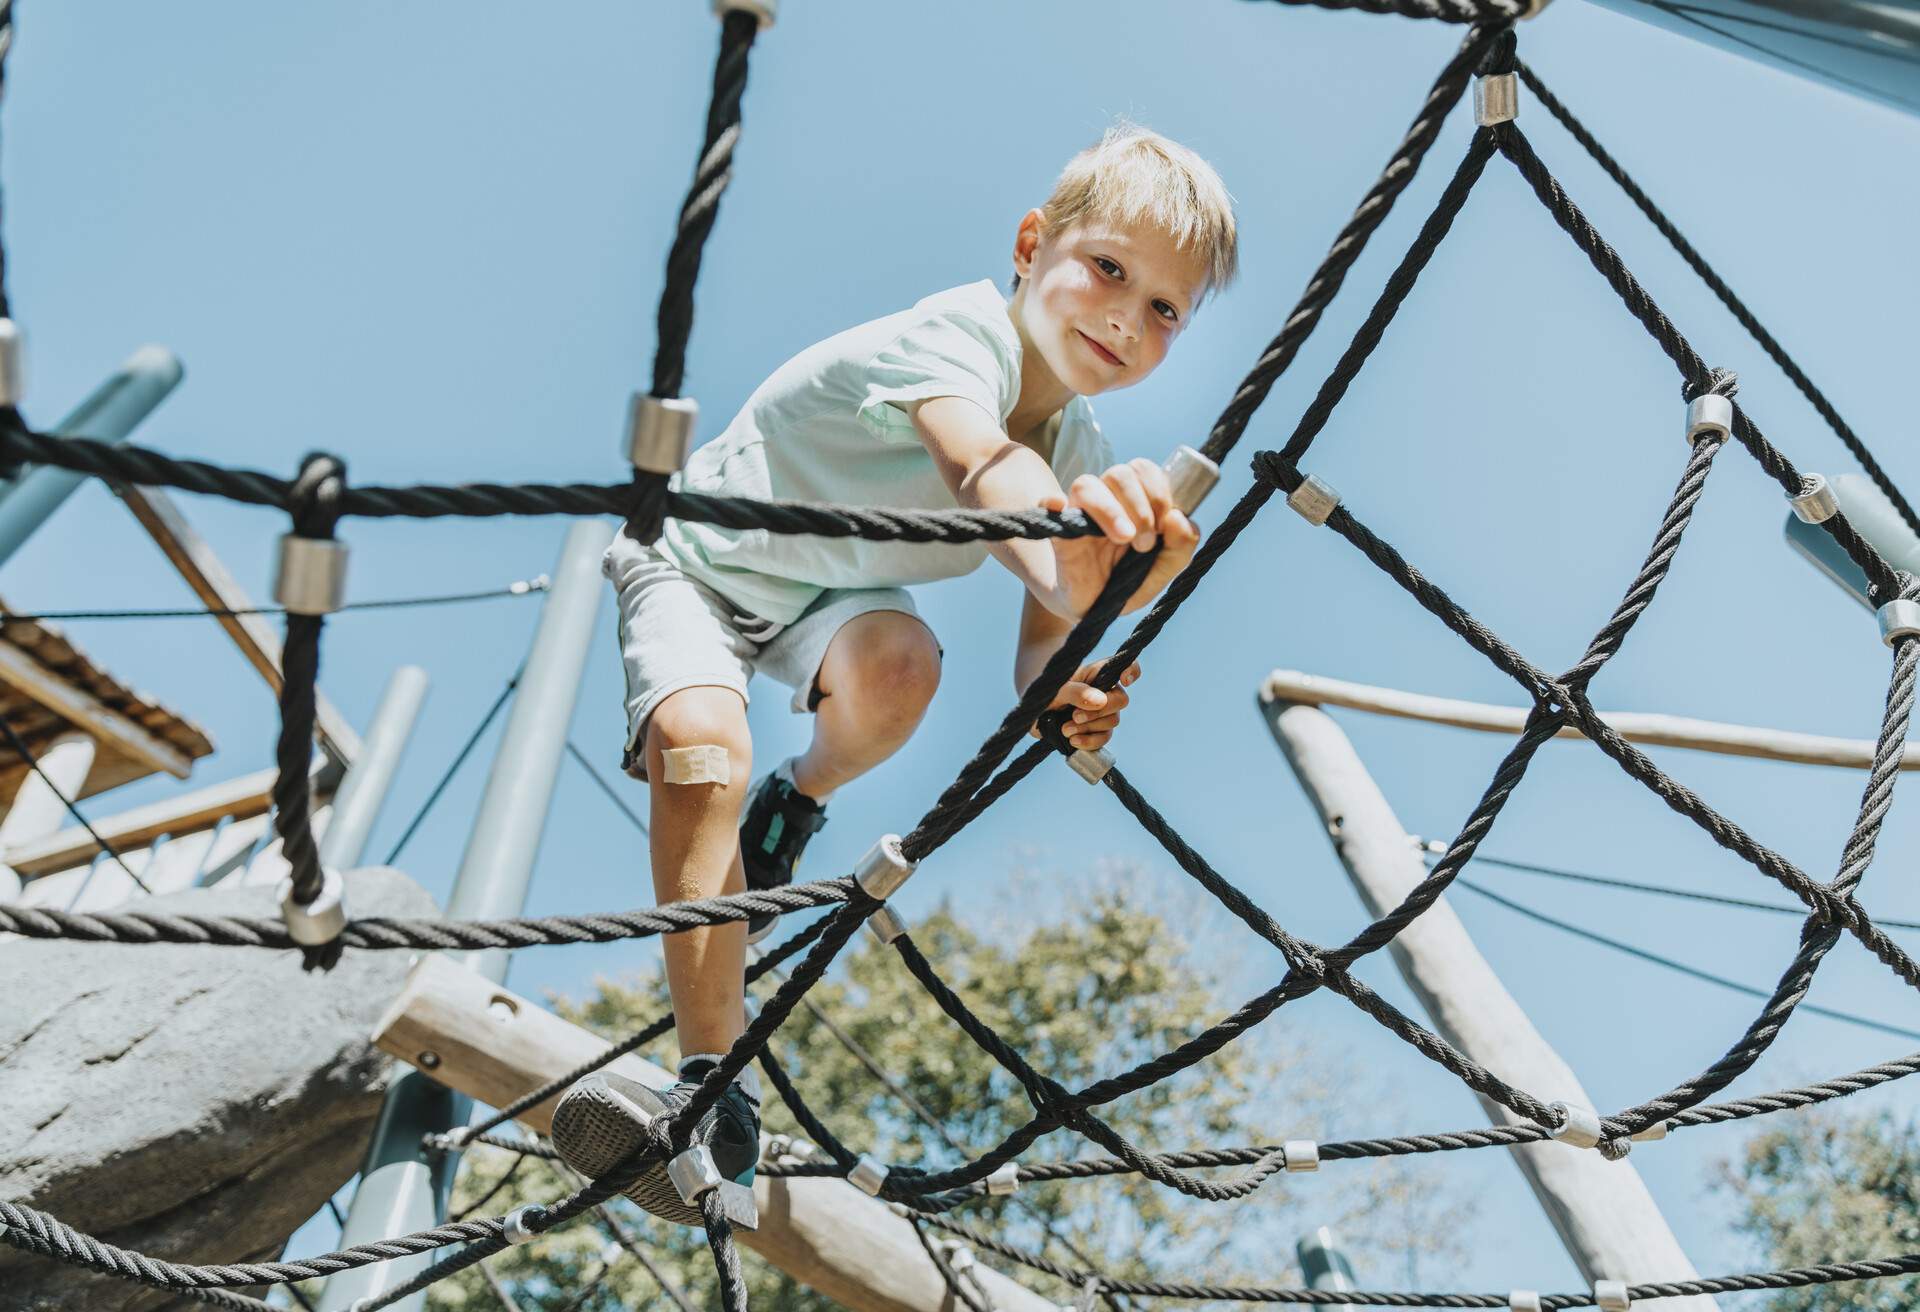 theme_people_child_kid_playground_park_climbing-gettyimages-1284738055_universal_within-usage-period_83348